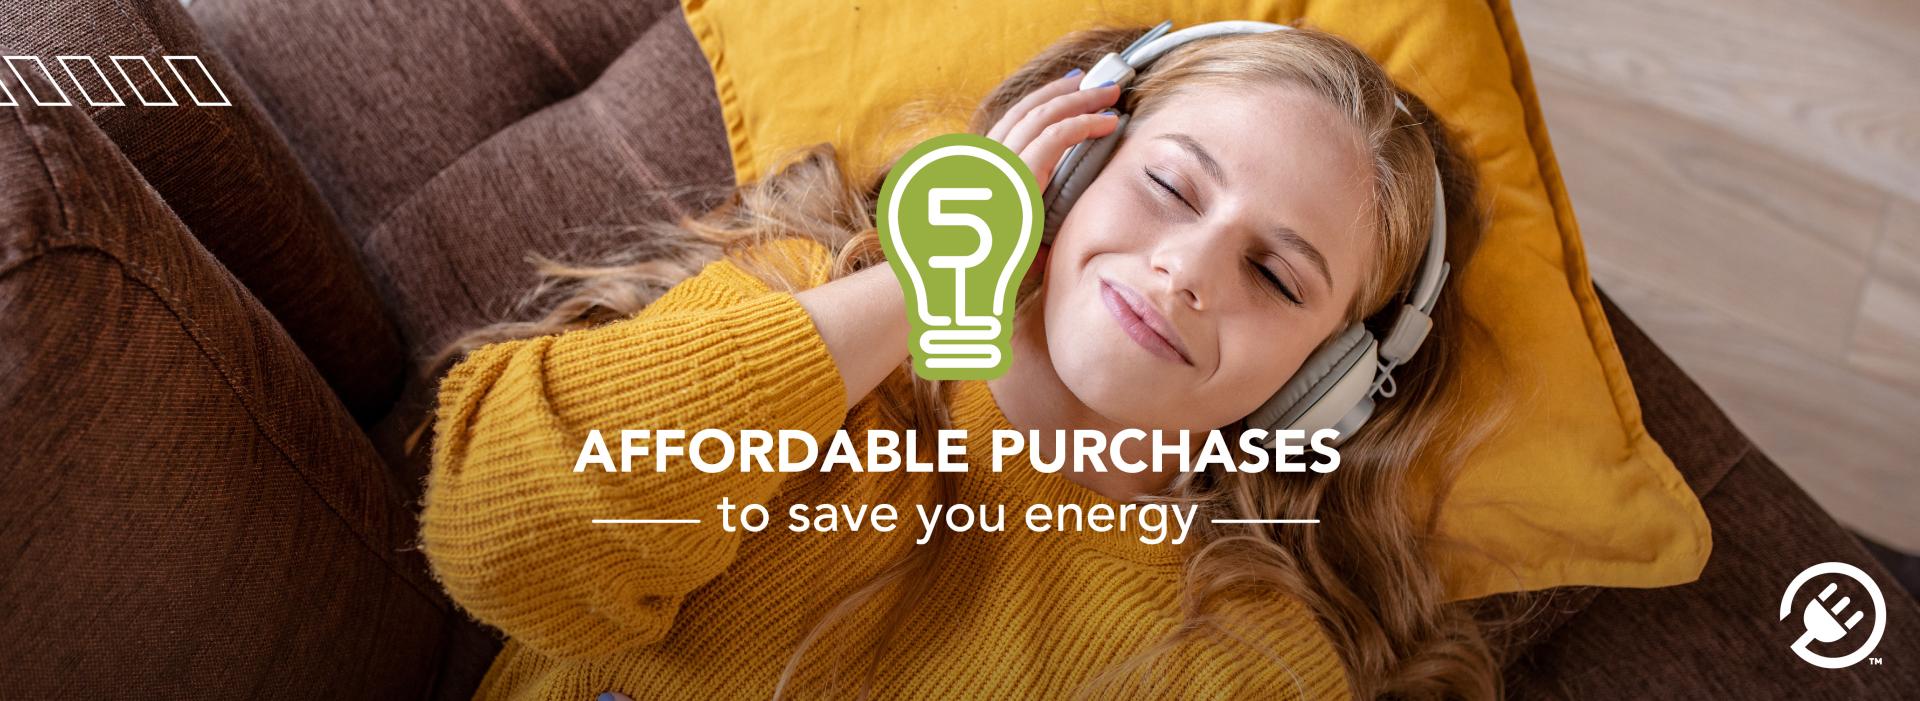 5 Affordable Home Purchases to Help Save Energy